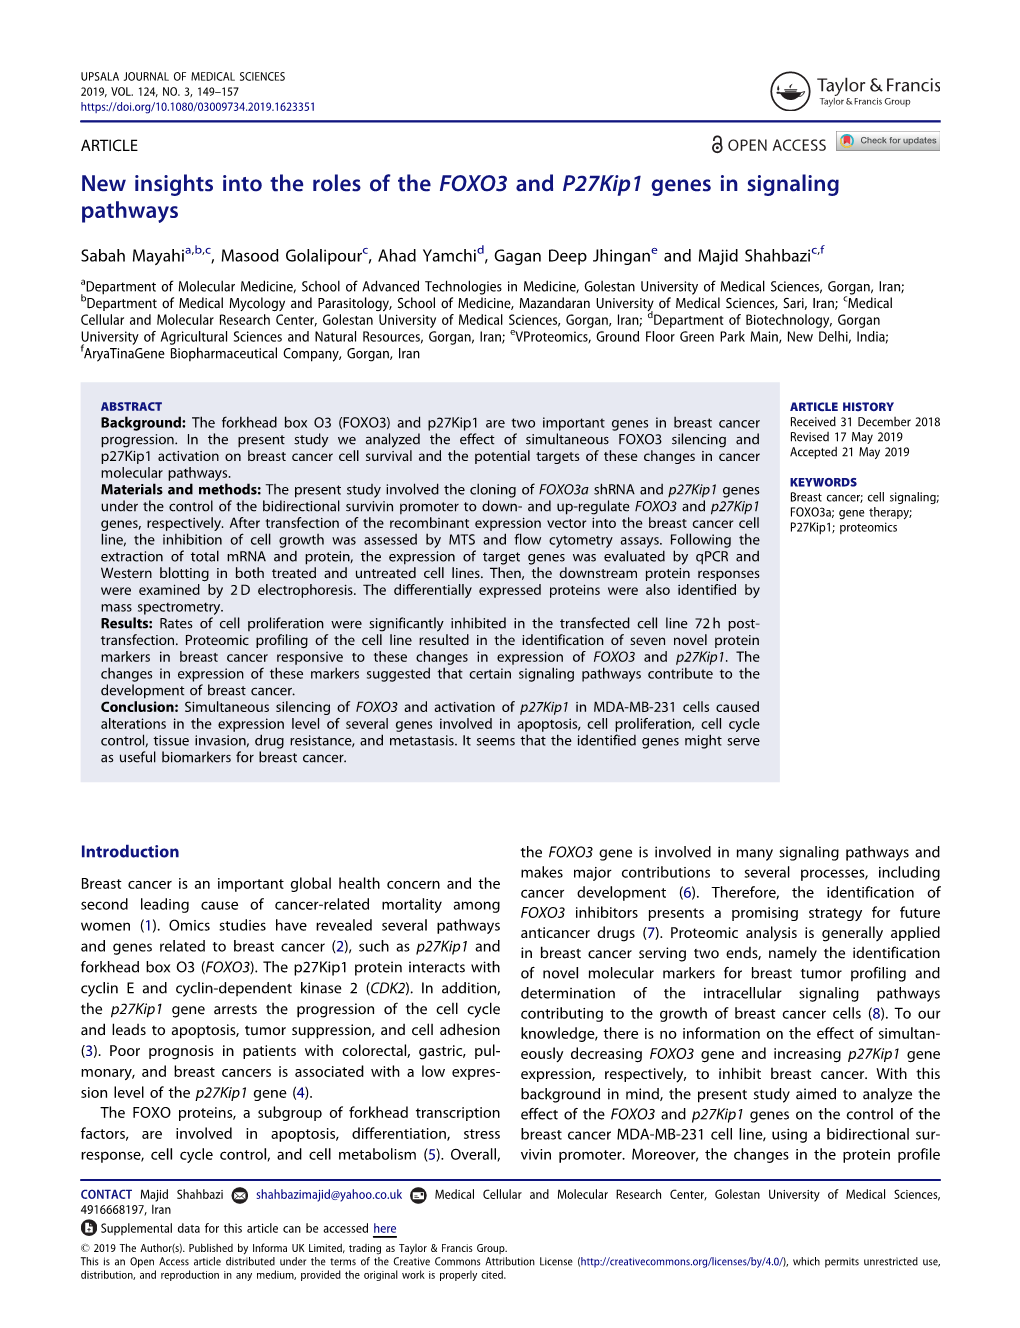 New Insights Into the Roles of the FOXO3 and P27kip1 Genes in Signaling Pathways